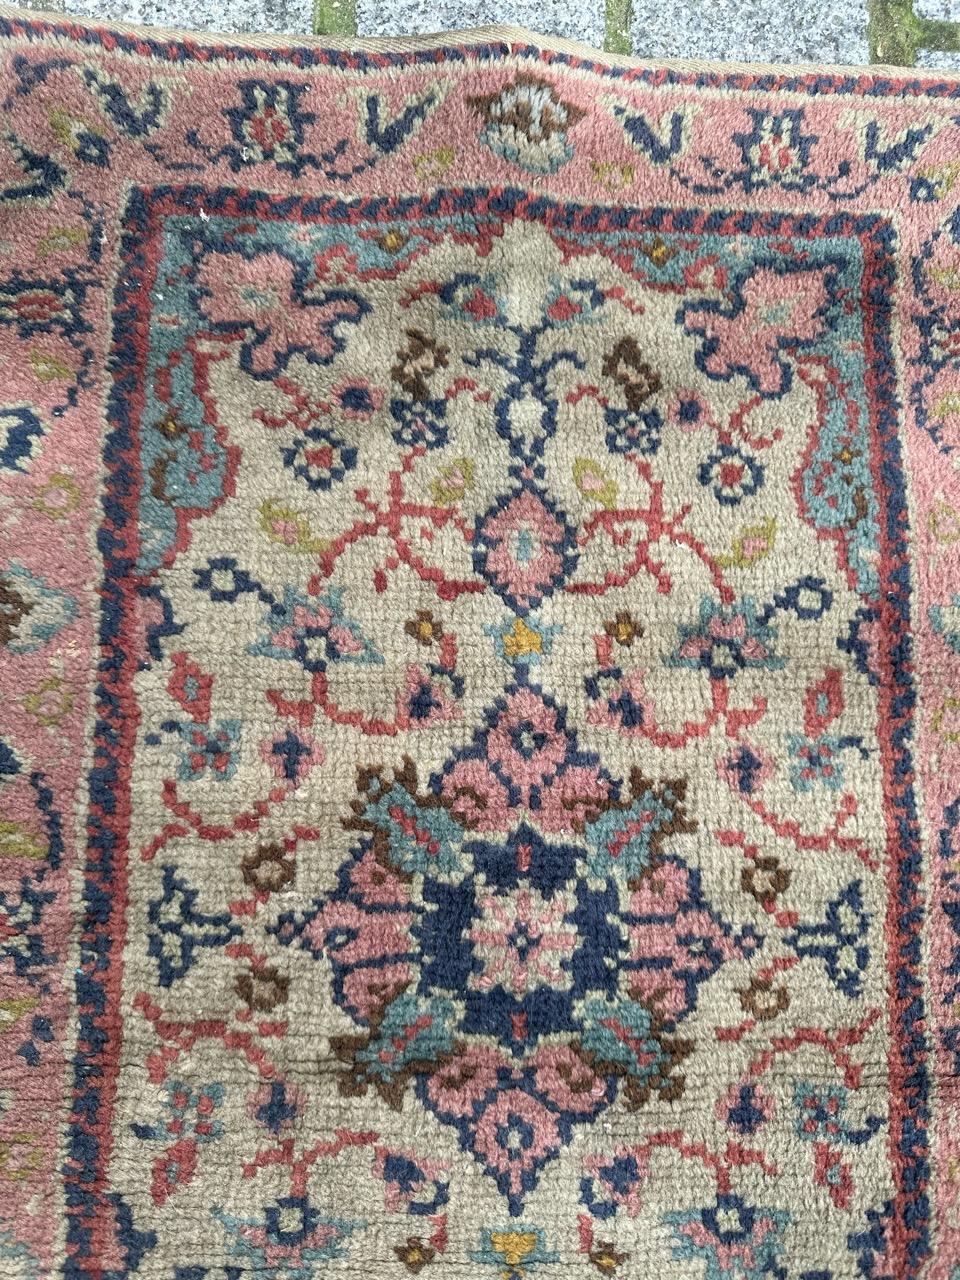 Pretty little Moroccan rug with a oushak design, with beautiful colours of the antique Oushak rugs, entirely hand knotted with wool on cotton foundation.

✨✨✨
